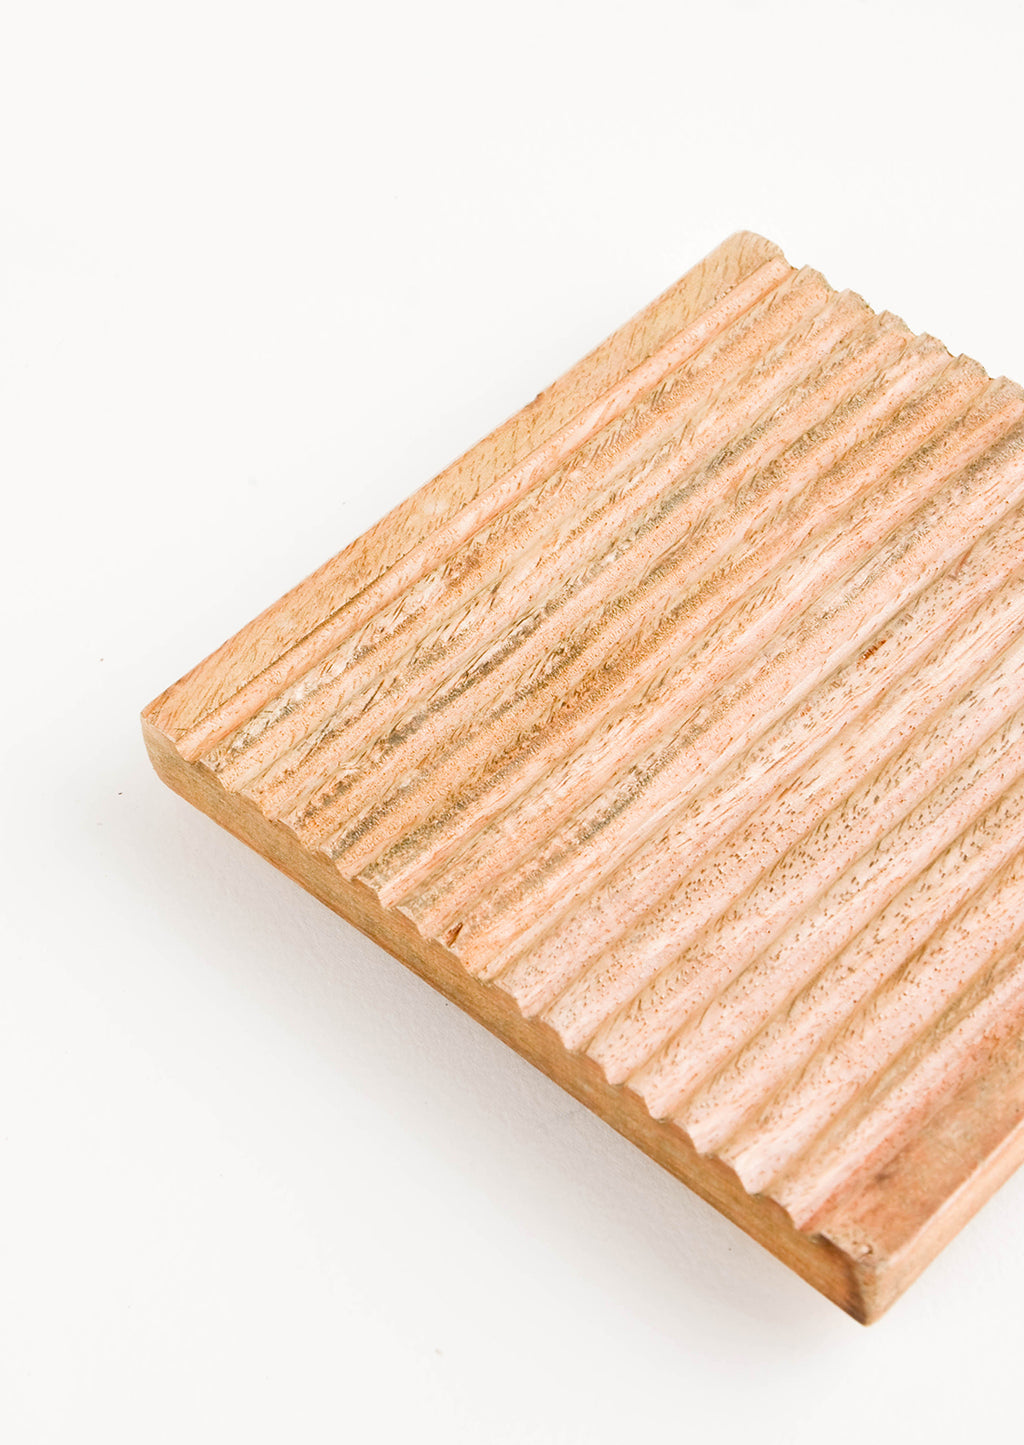 2: Wooden trivet in warm, medium-colored wood with grooved construction and square shape